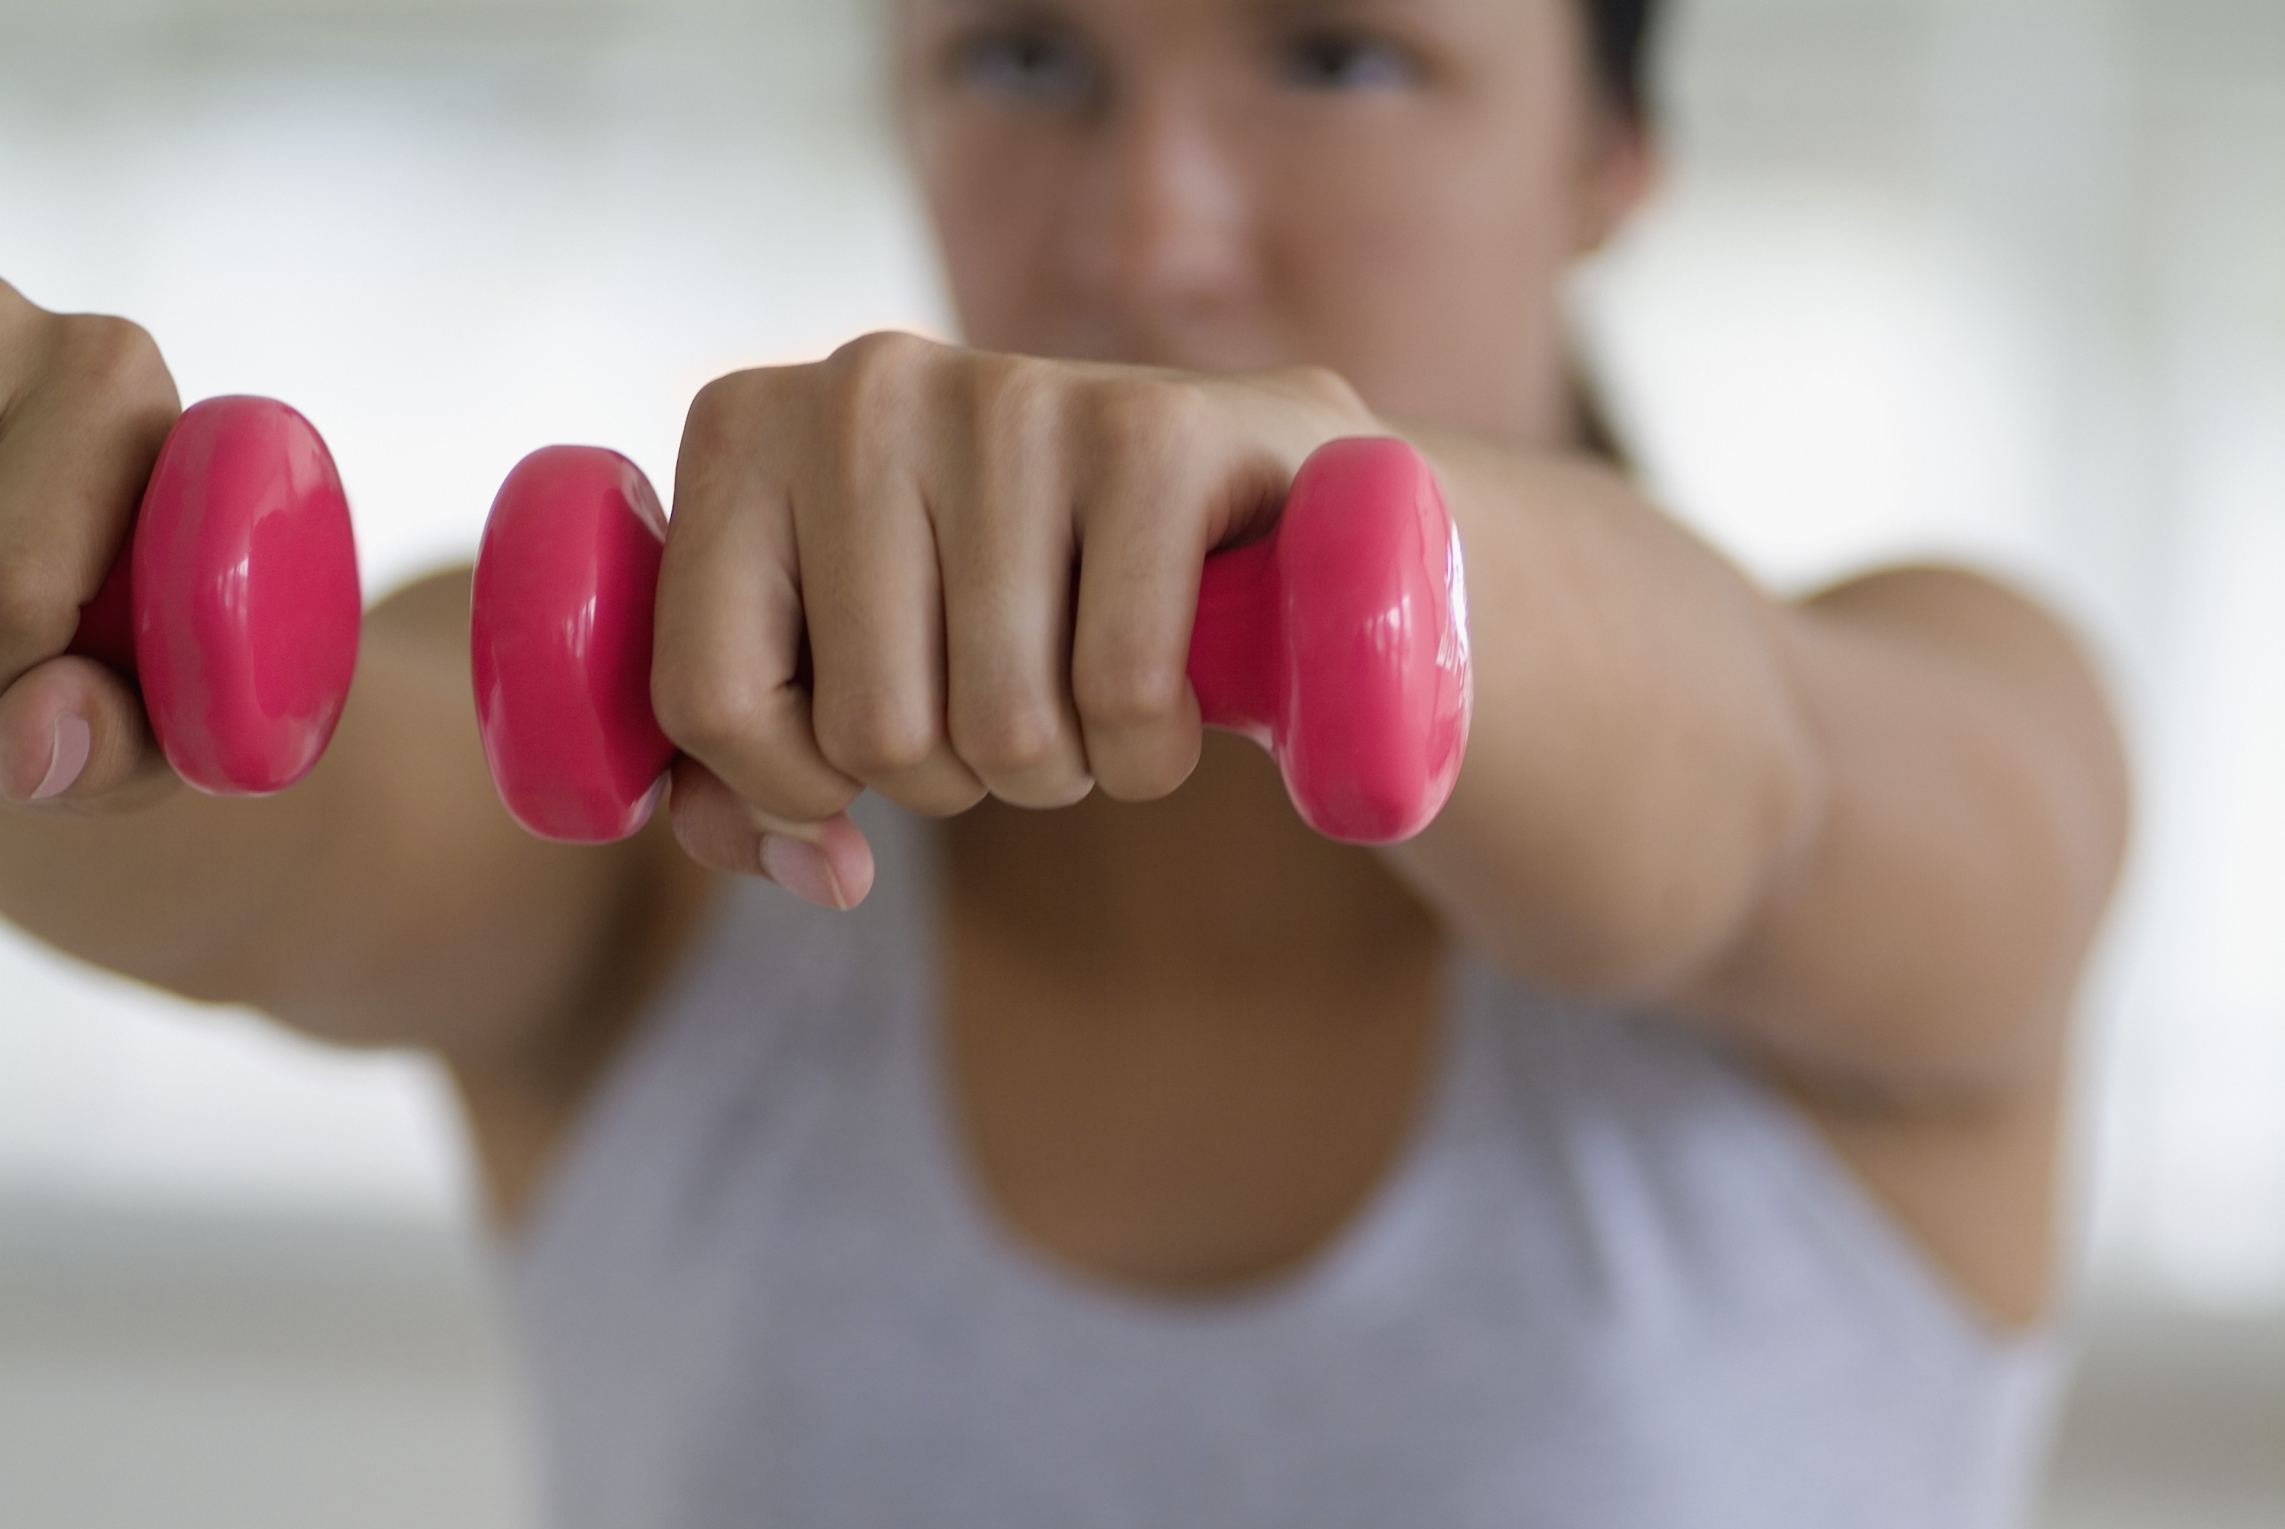 Arm Exercises Using 2-Lb. Weights